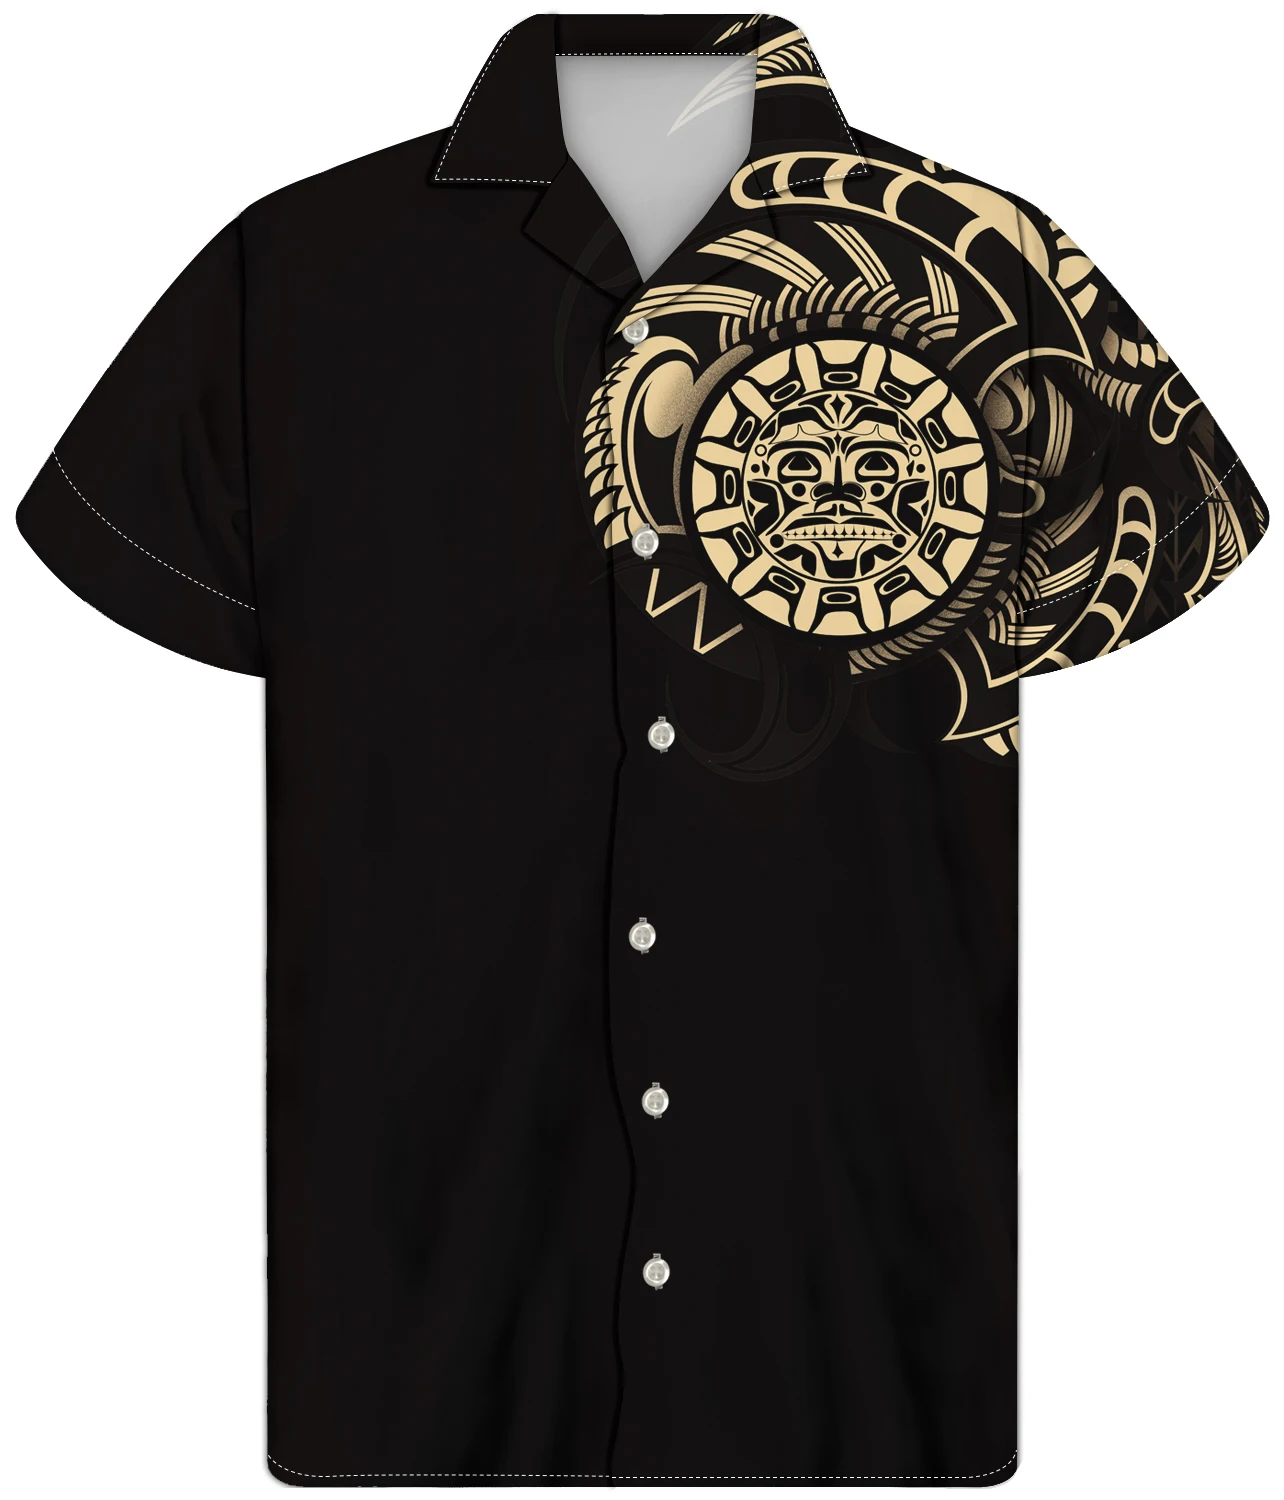 Men's Haute Button Tribal Polynesian Top Black Background With Gold Stripes Face Print Casual Short Sleeves